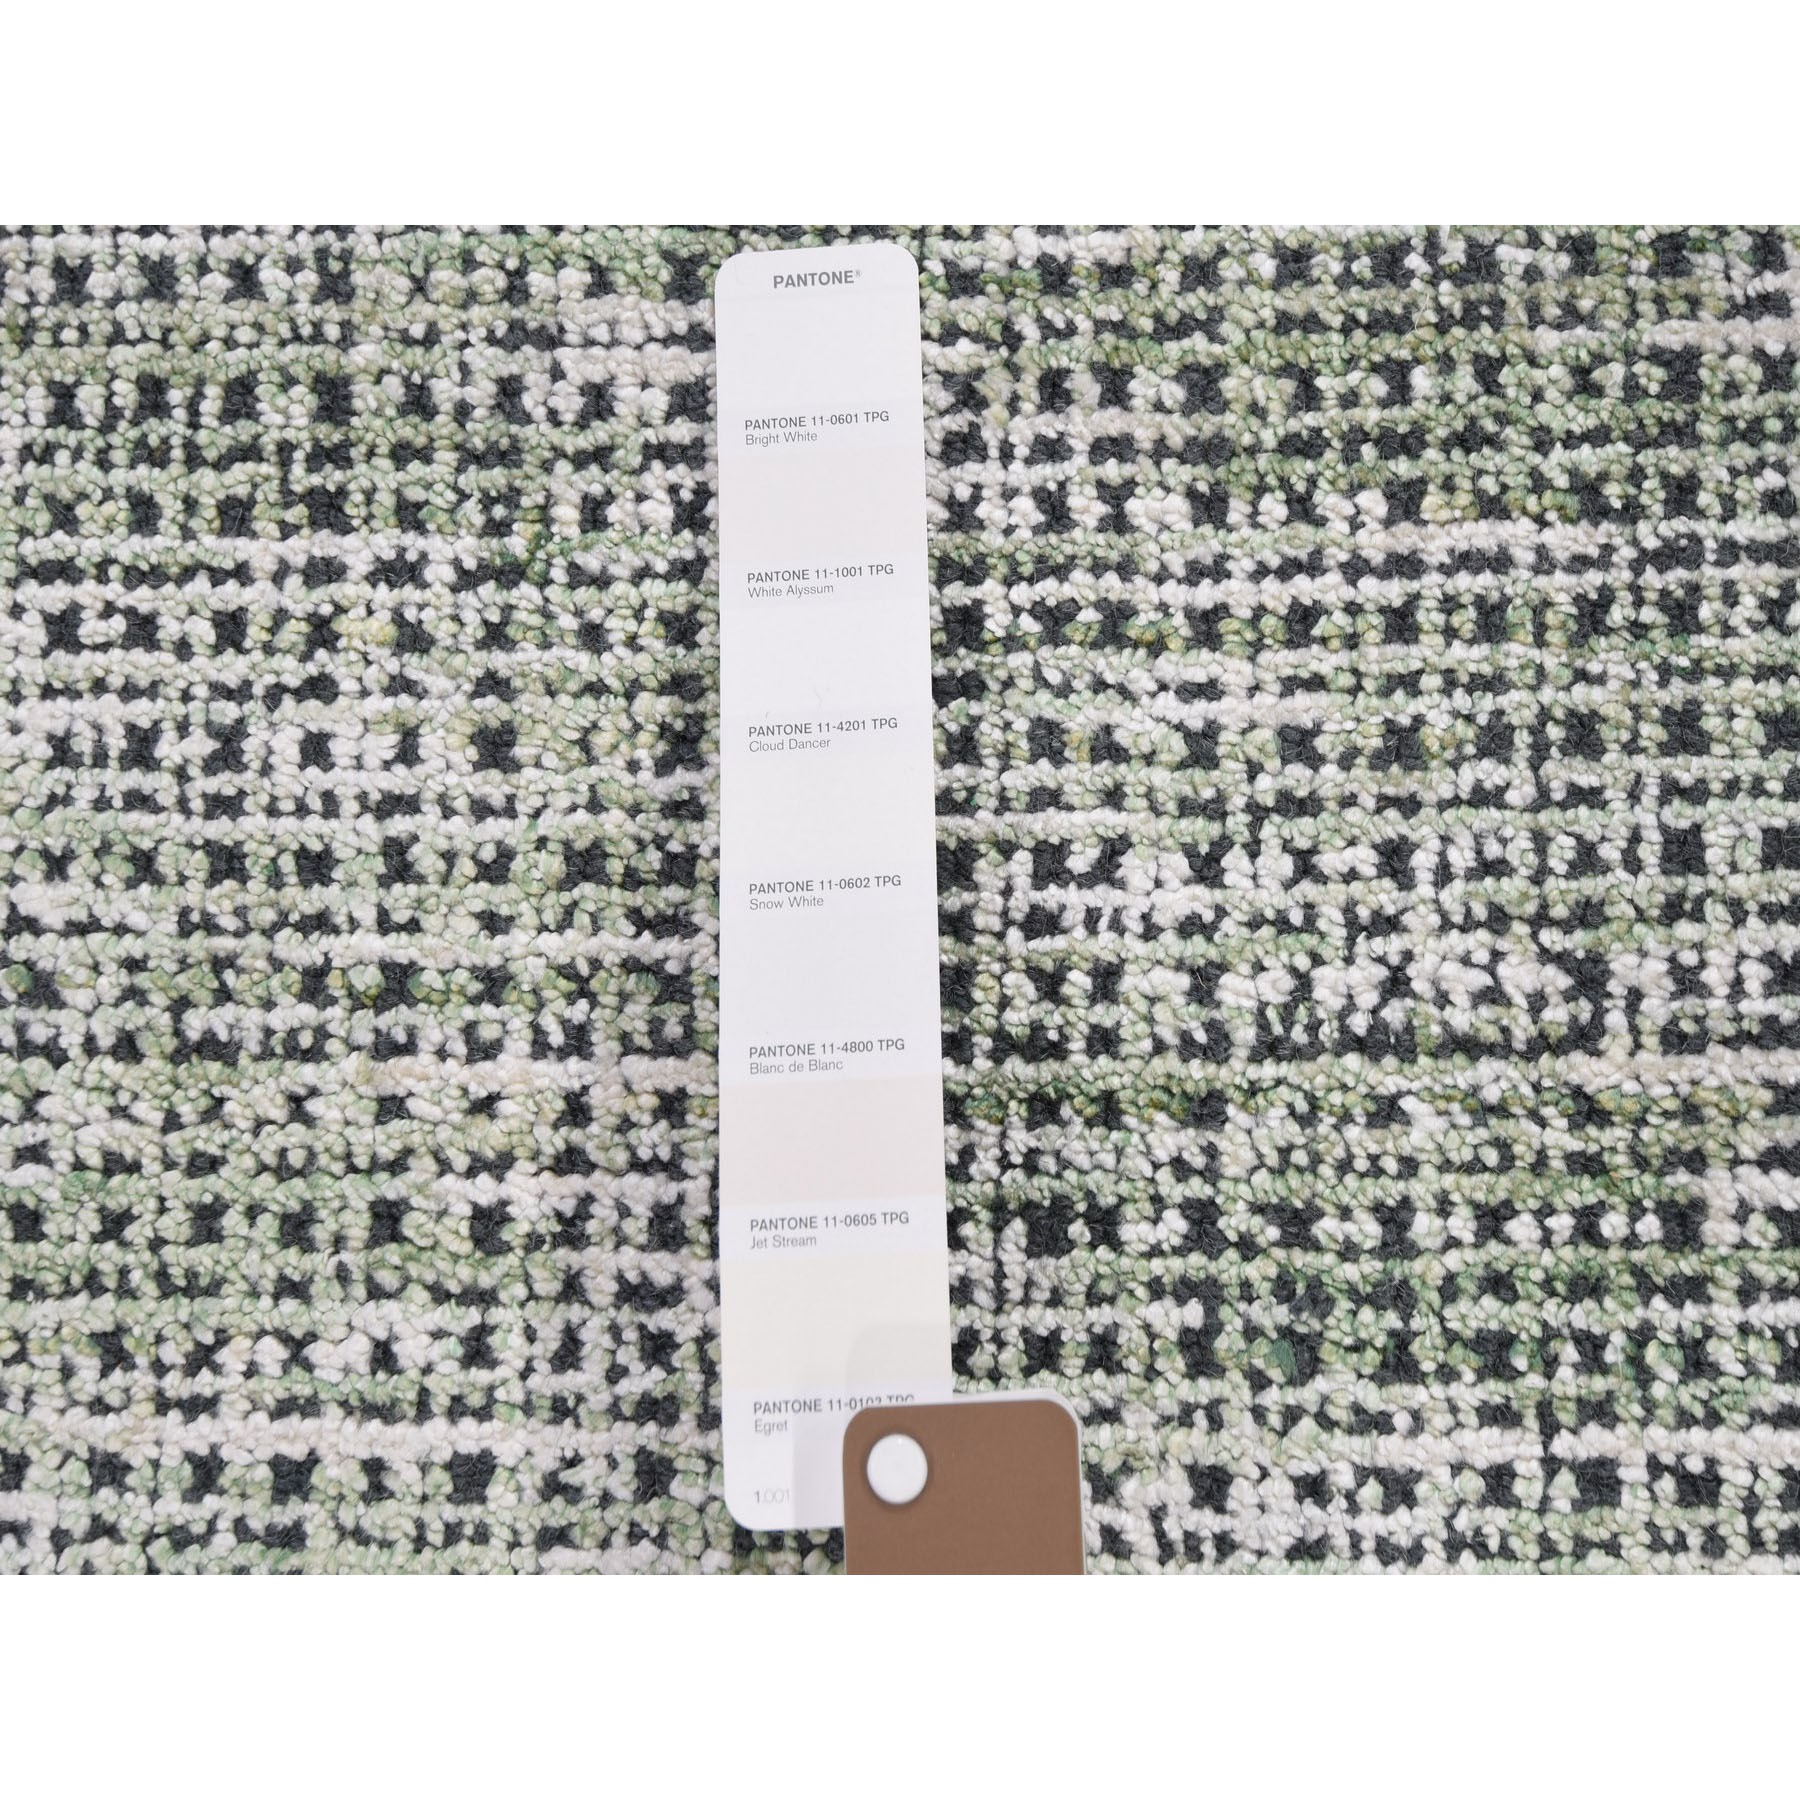 8-1 x10-2  Fence Design With Greens Wool And Art silk Tone On Tone Hand Loomed Oriental Rug 